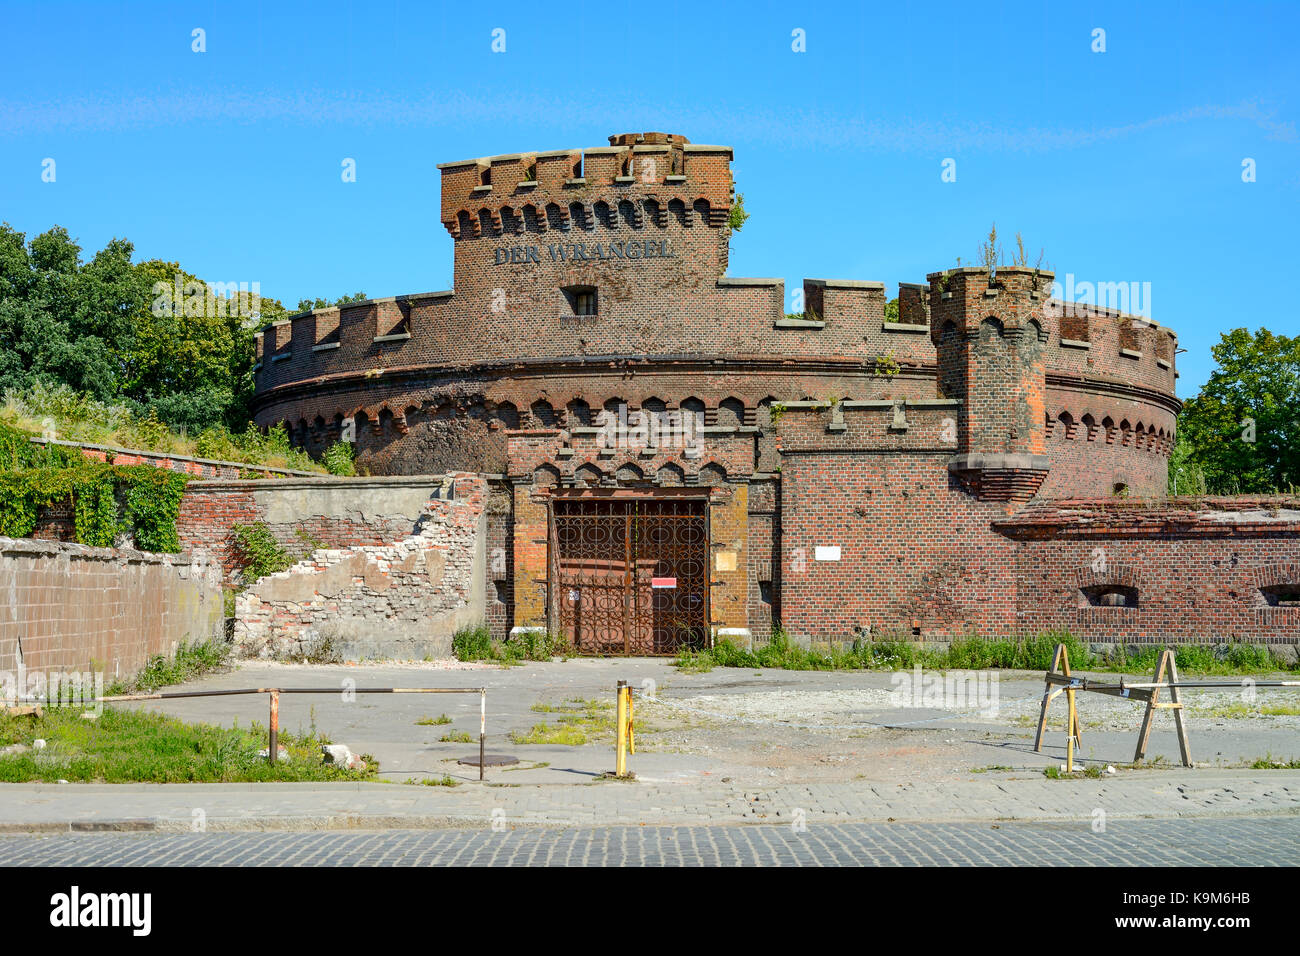 Kaliningrad, the tower Wrangel is part of the fortifications of the old Koenigsberg Stock Photo